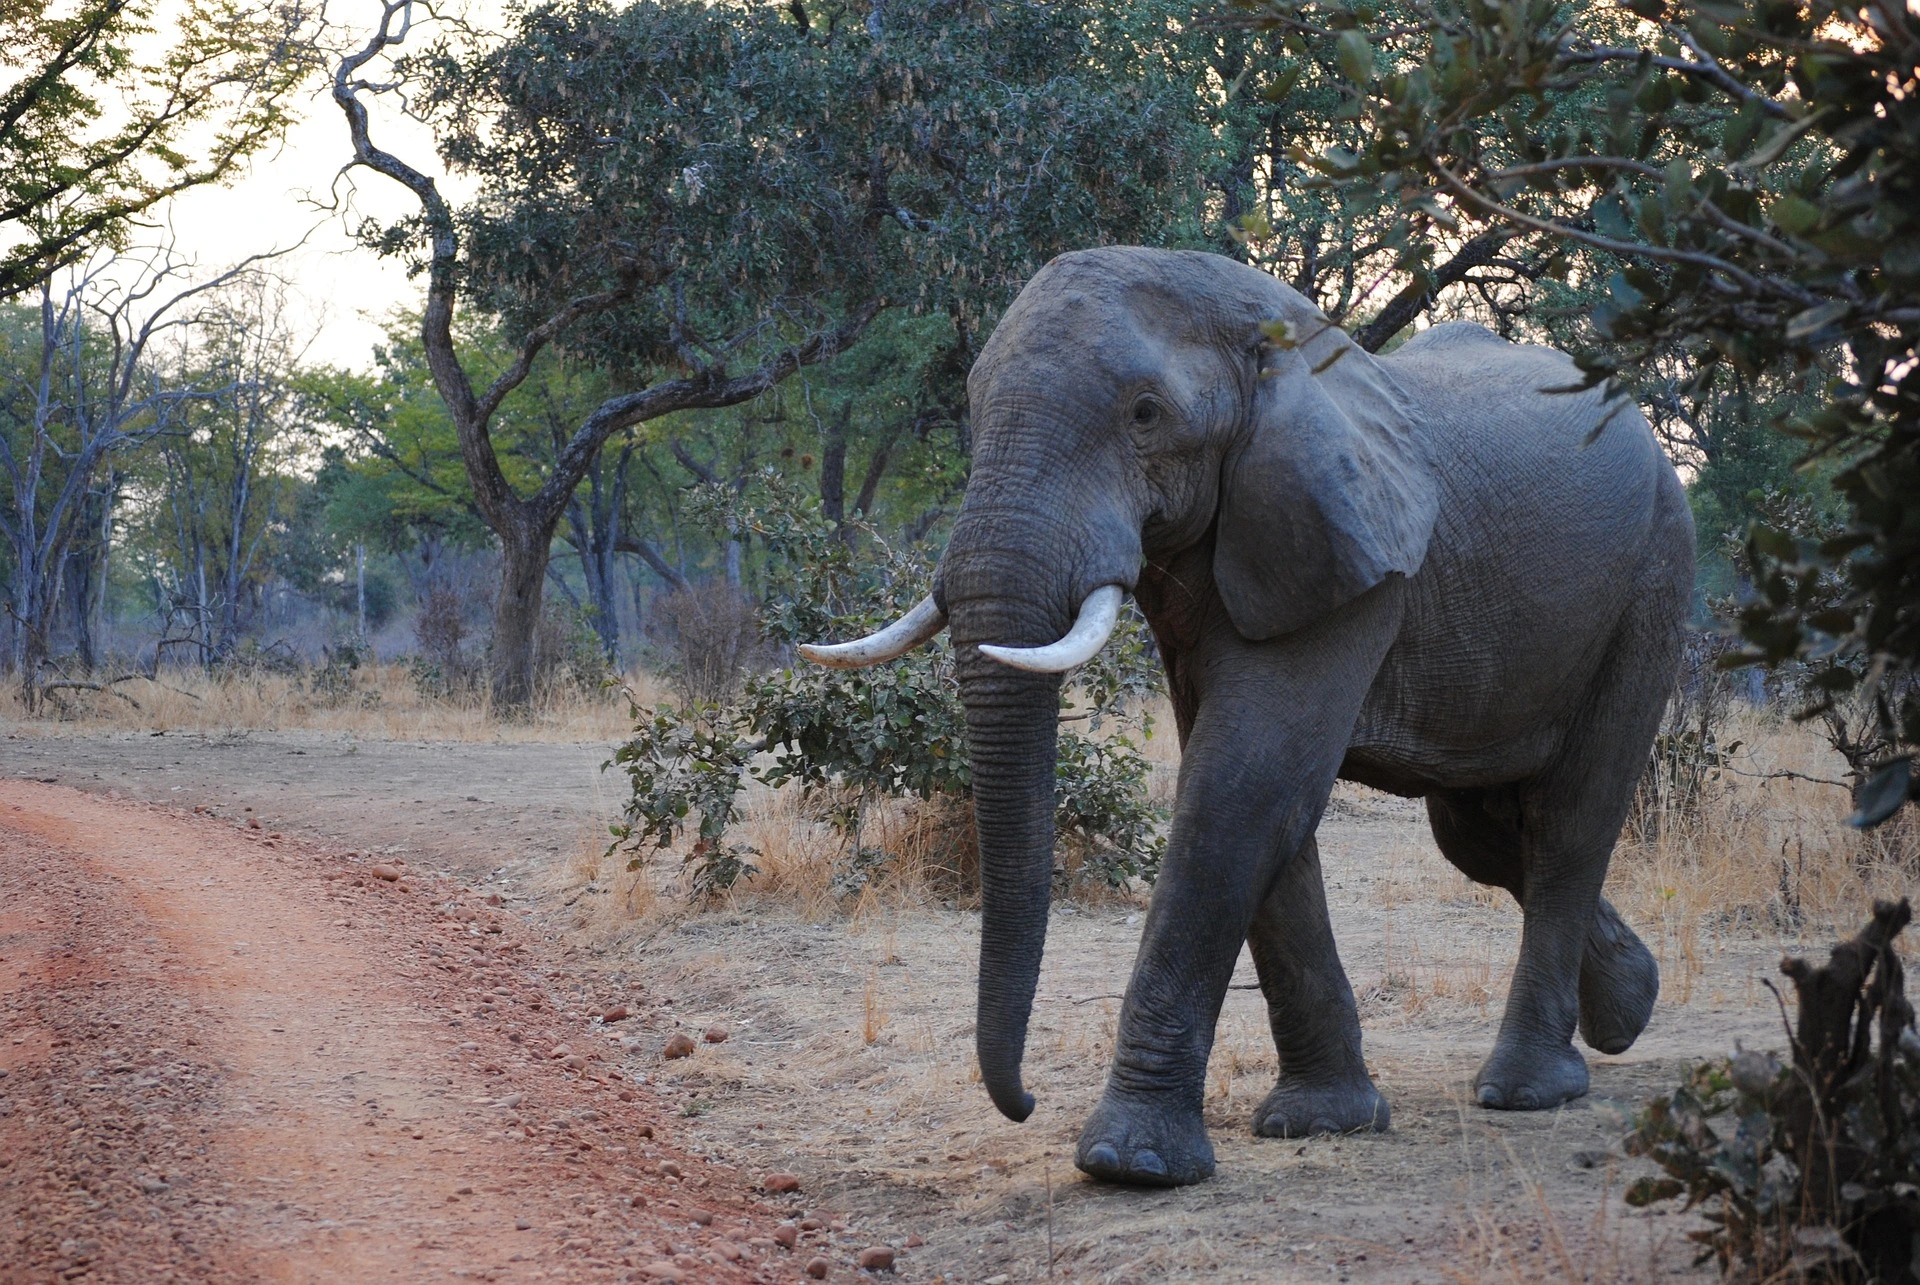 African luxury Safari holidays - Elephant in South Luangwa National Park in Zambia